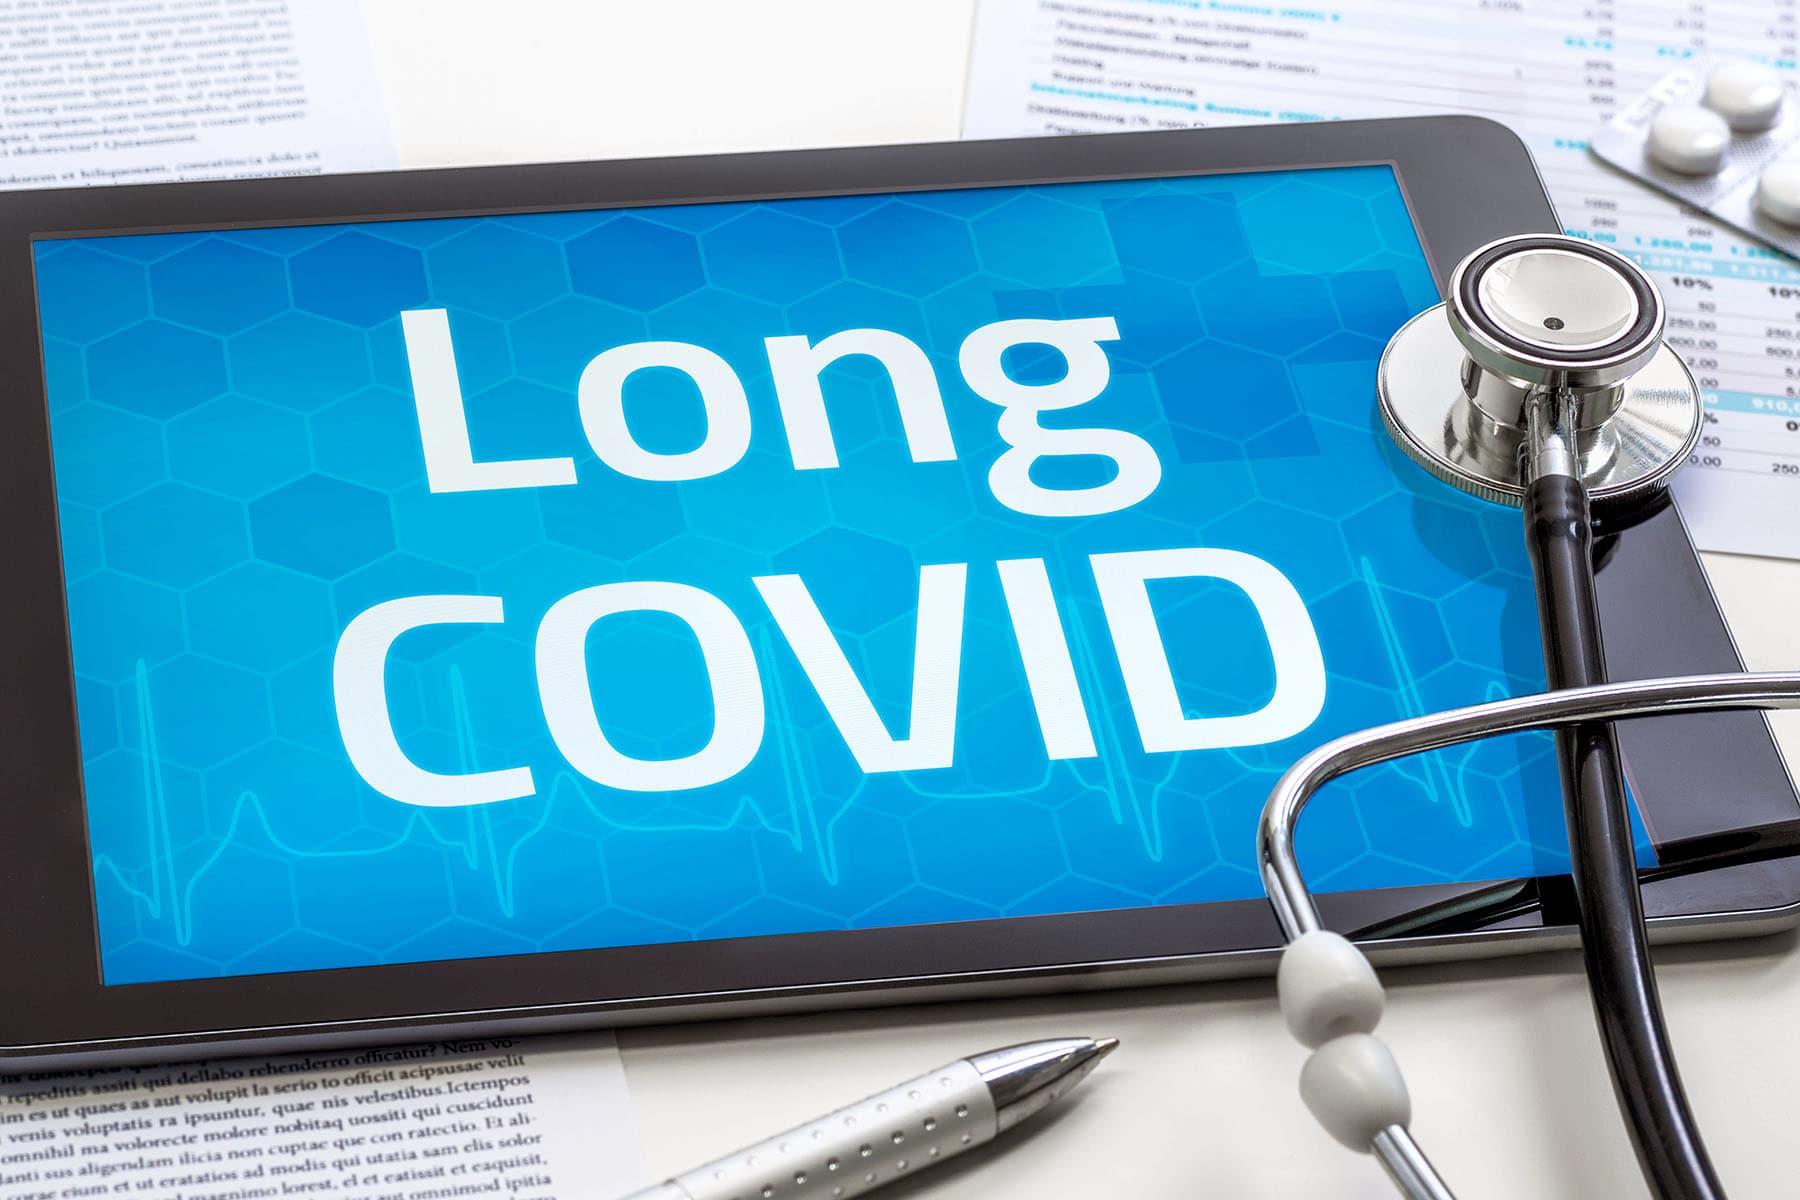 U.S. to Launch Long COVID Trial Focused on Sleep, Exercise